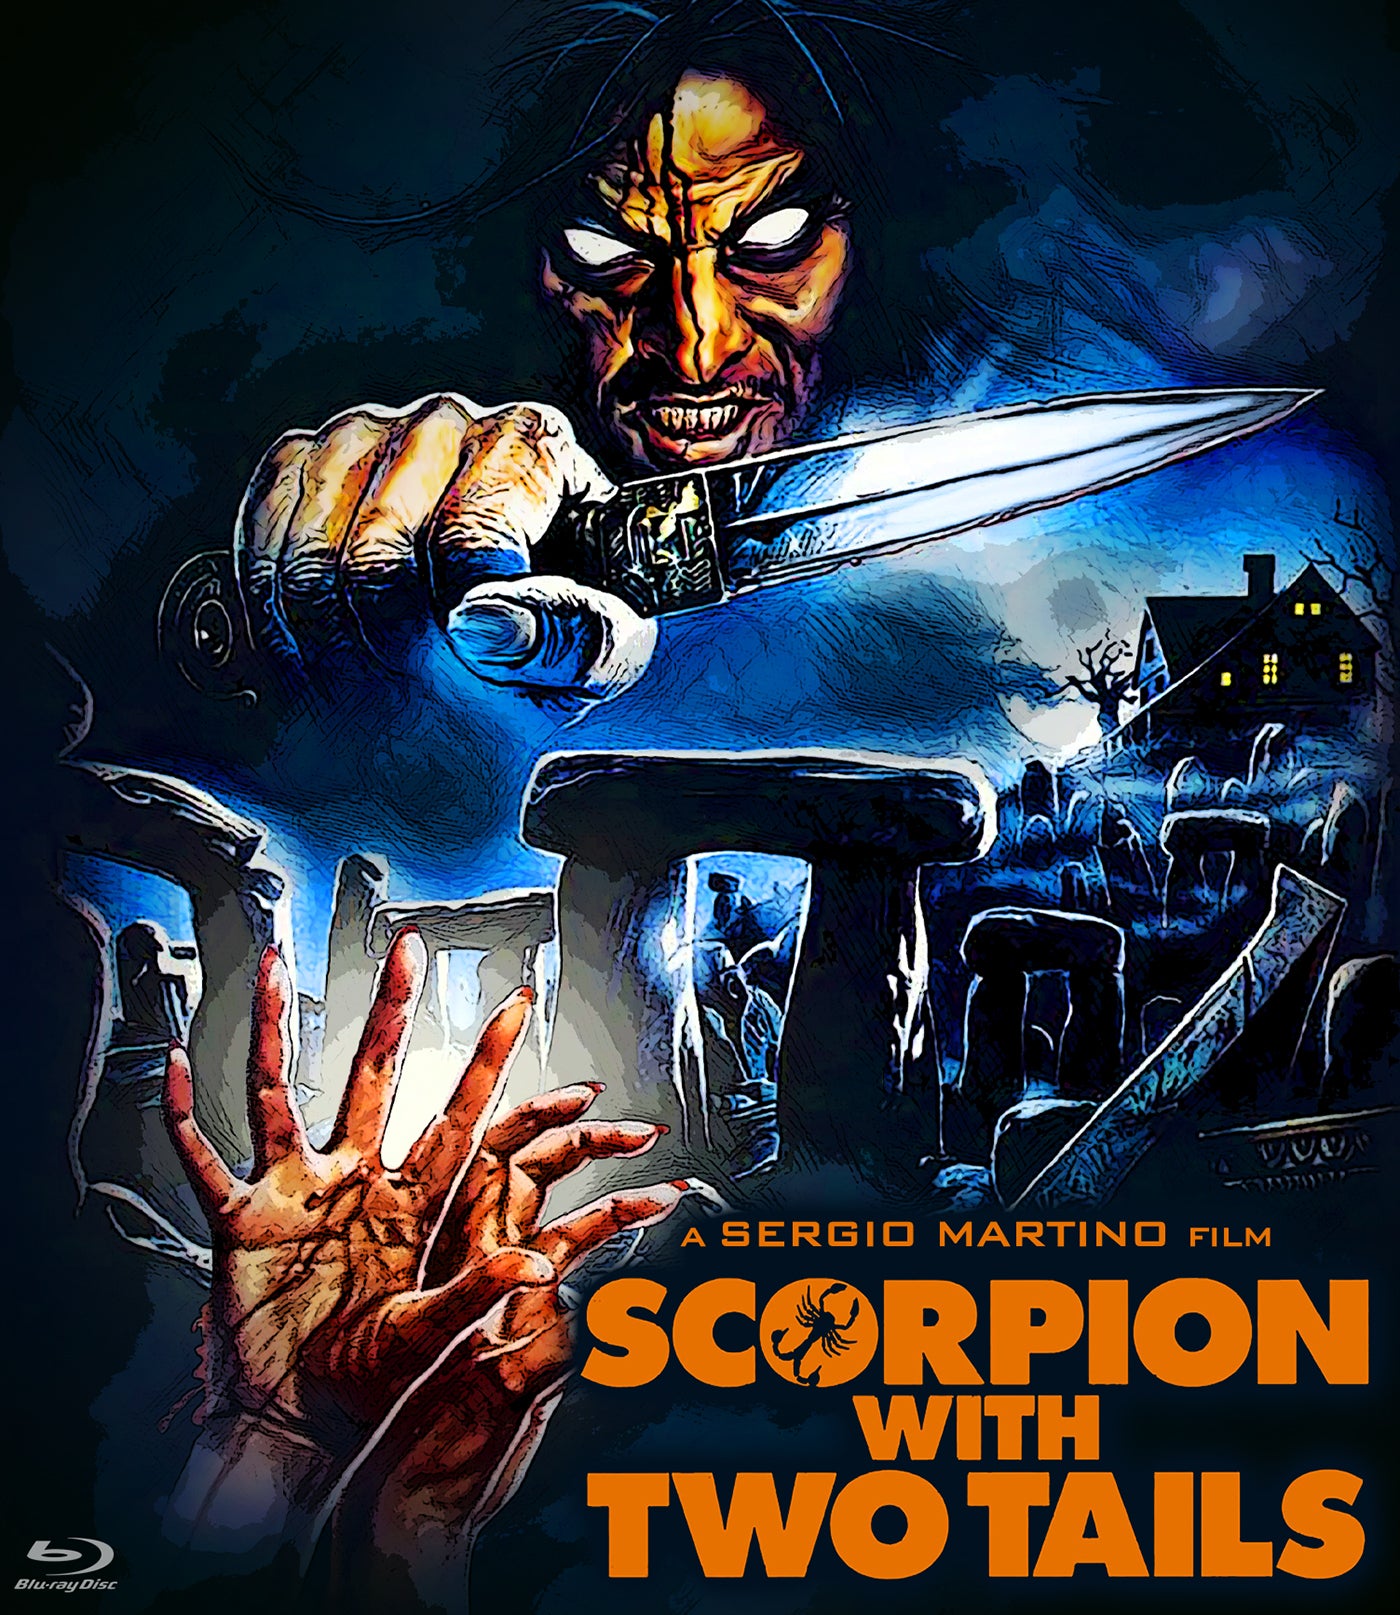 THE SCORPION WITH TWO TAILS BLU-RAY